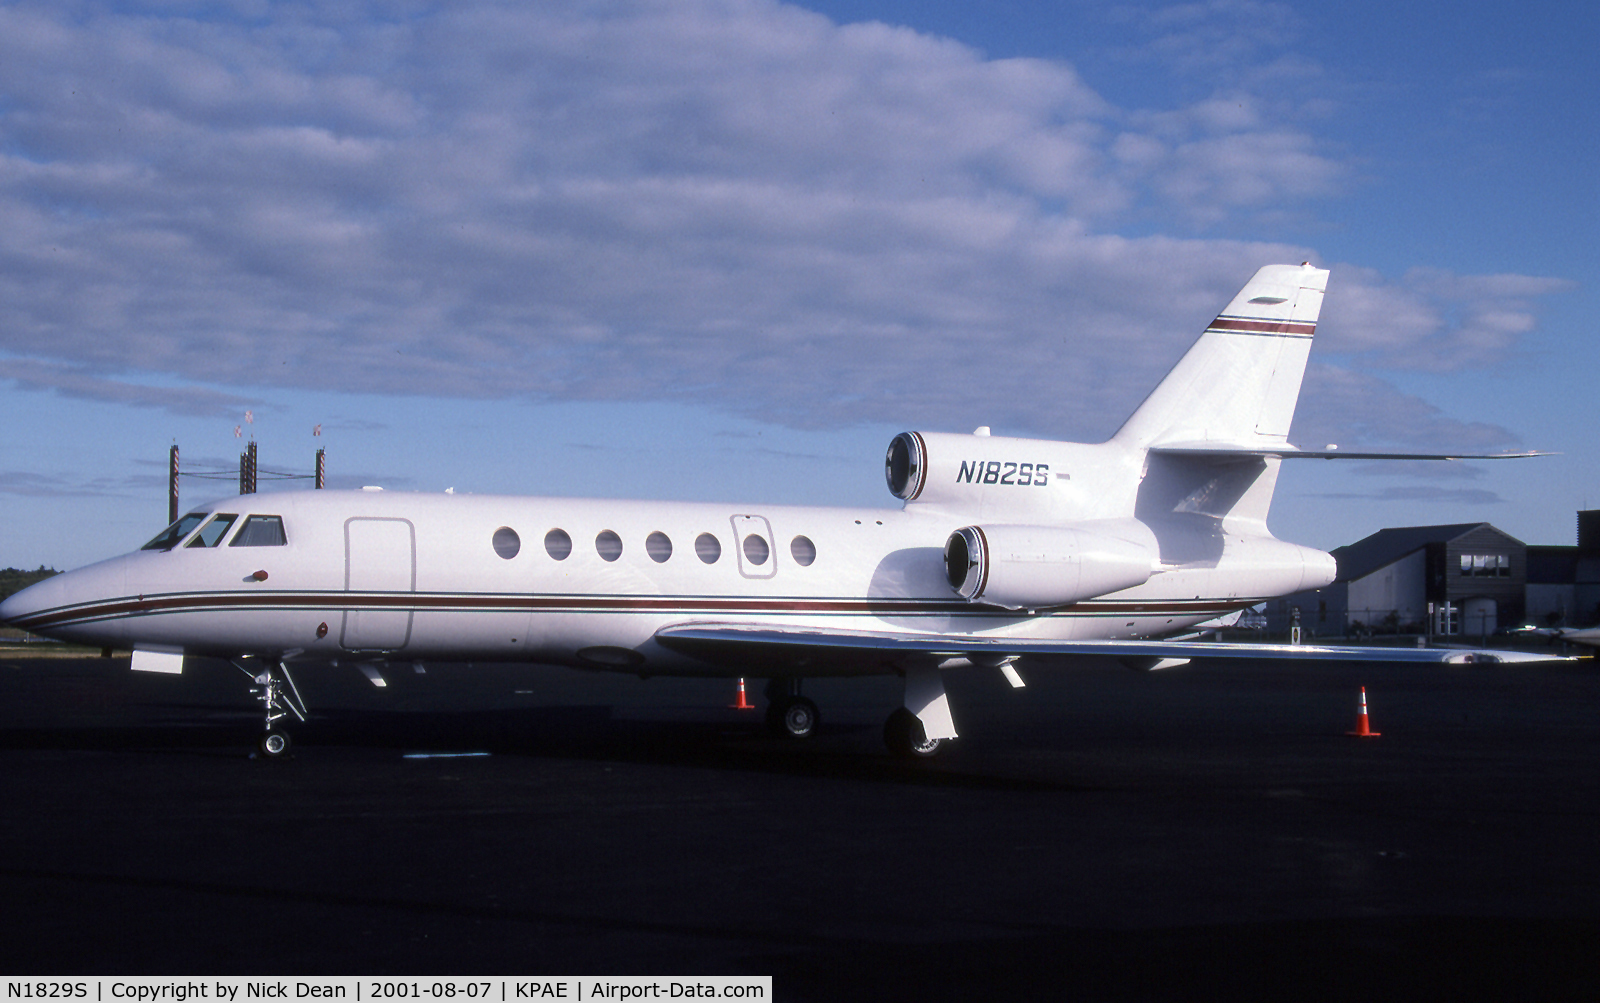 N1829S, 1999 Dassault Falcon 50EX C/N 280, The Stevens Group were regular visitors to KPAE a few years ago